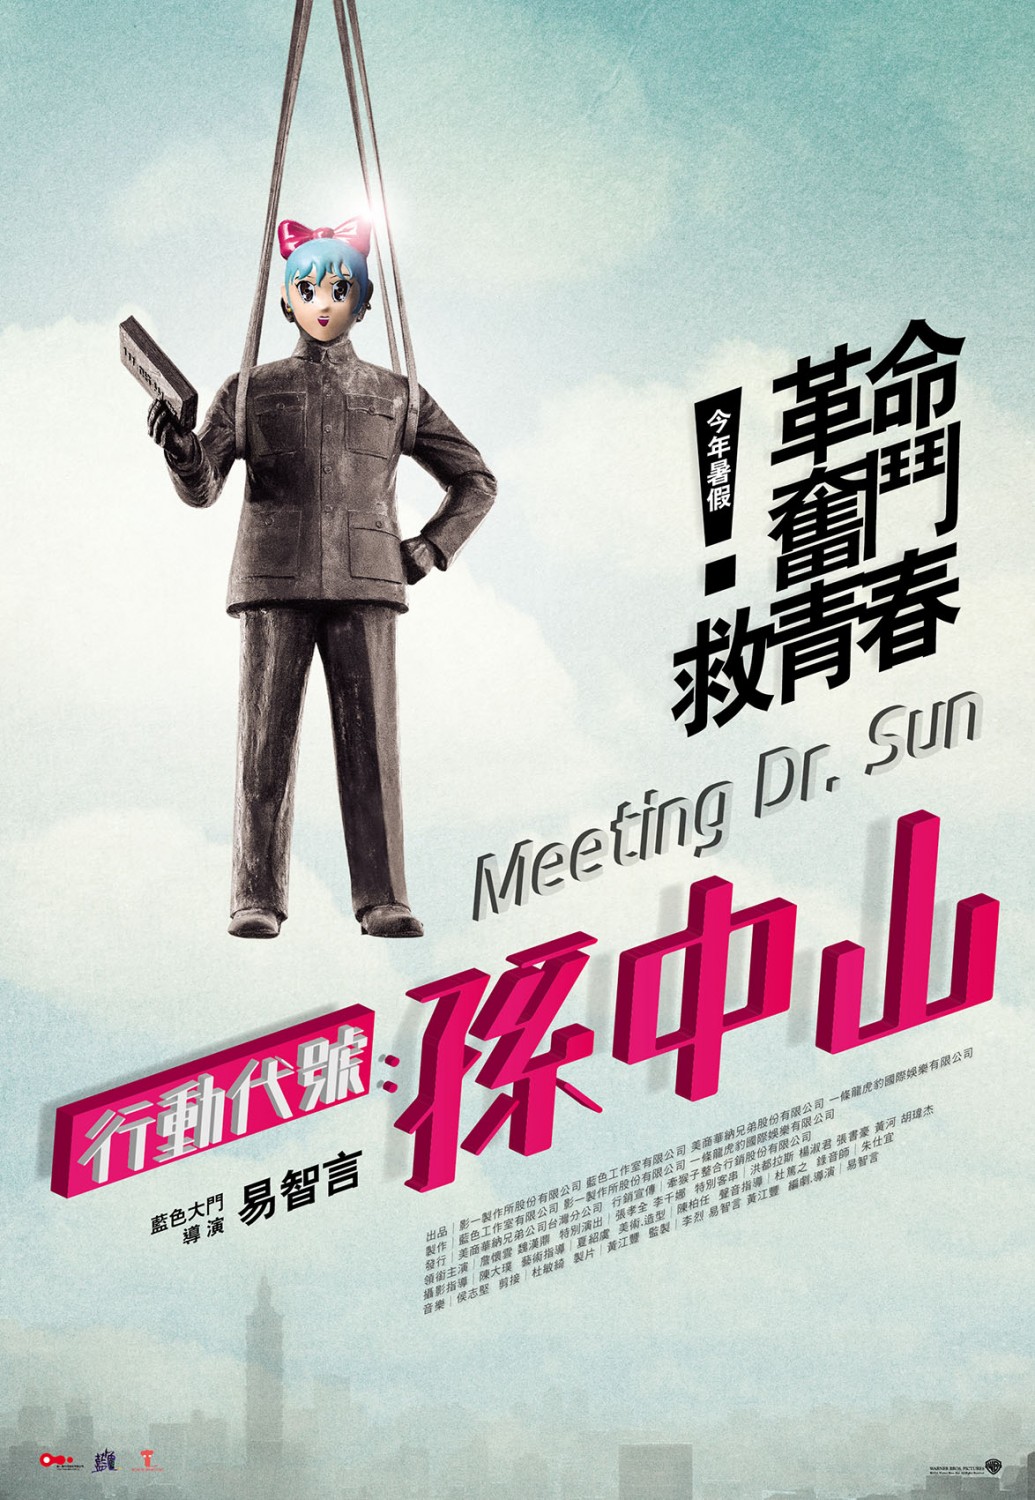 Extra Large Movie Poster Image for Meeting Dr. Sun (#1 of 3)